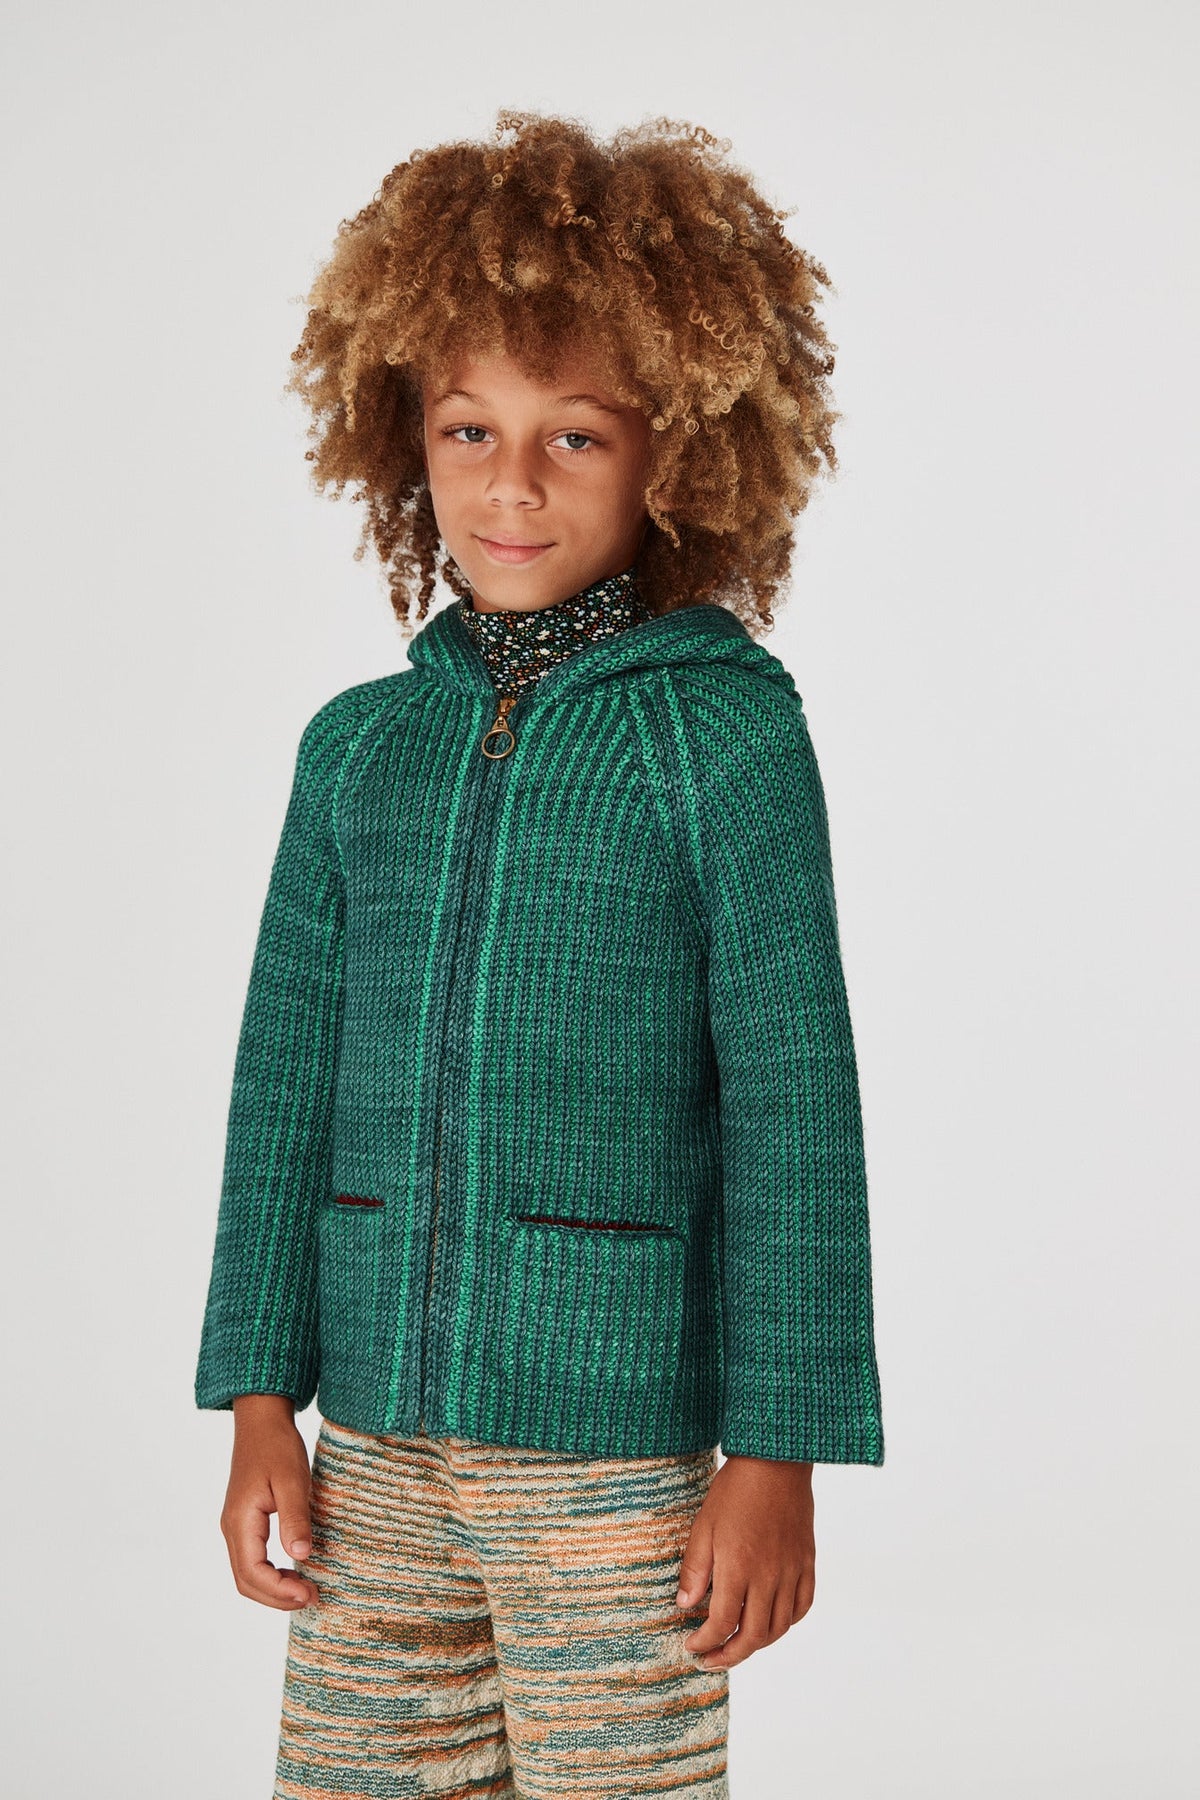 North Wind Jacket - Peacock+Model is 50 inches tall, 50lbs, wearing a size 7-8y